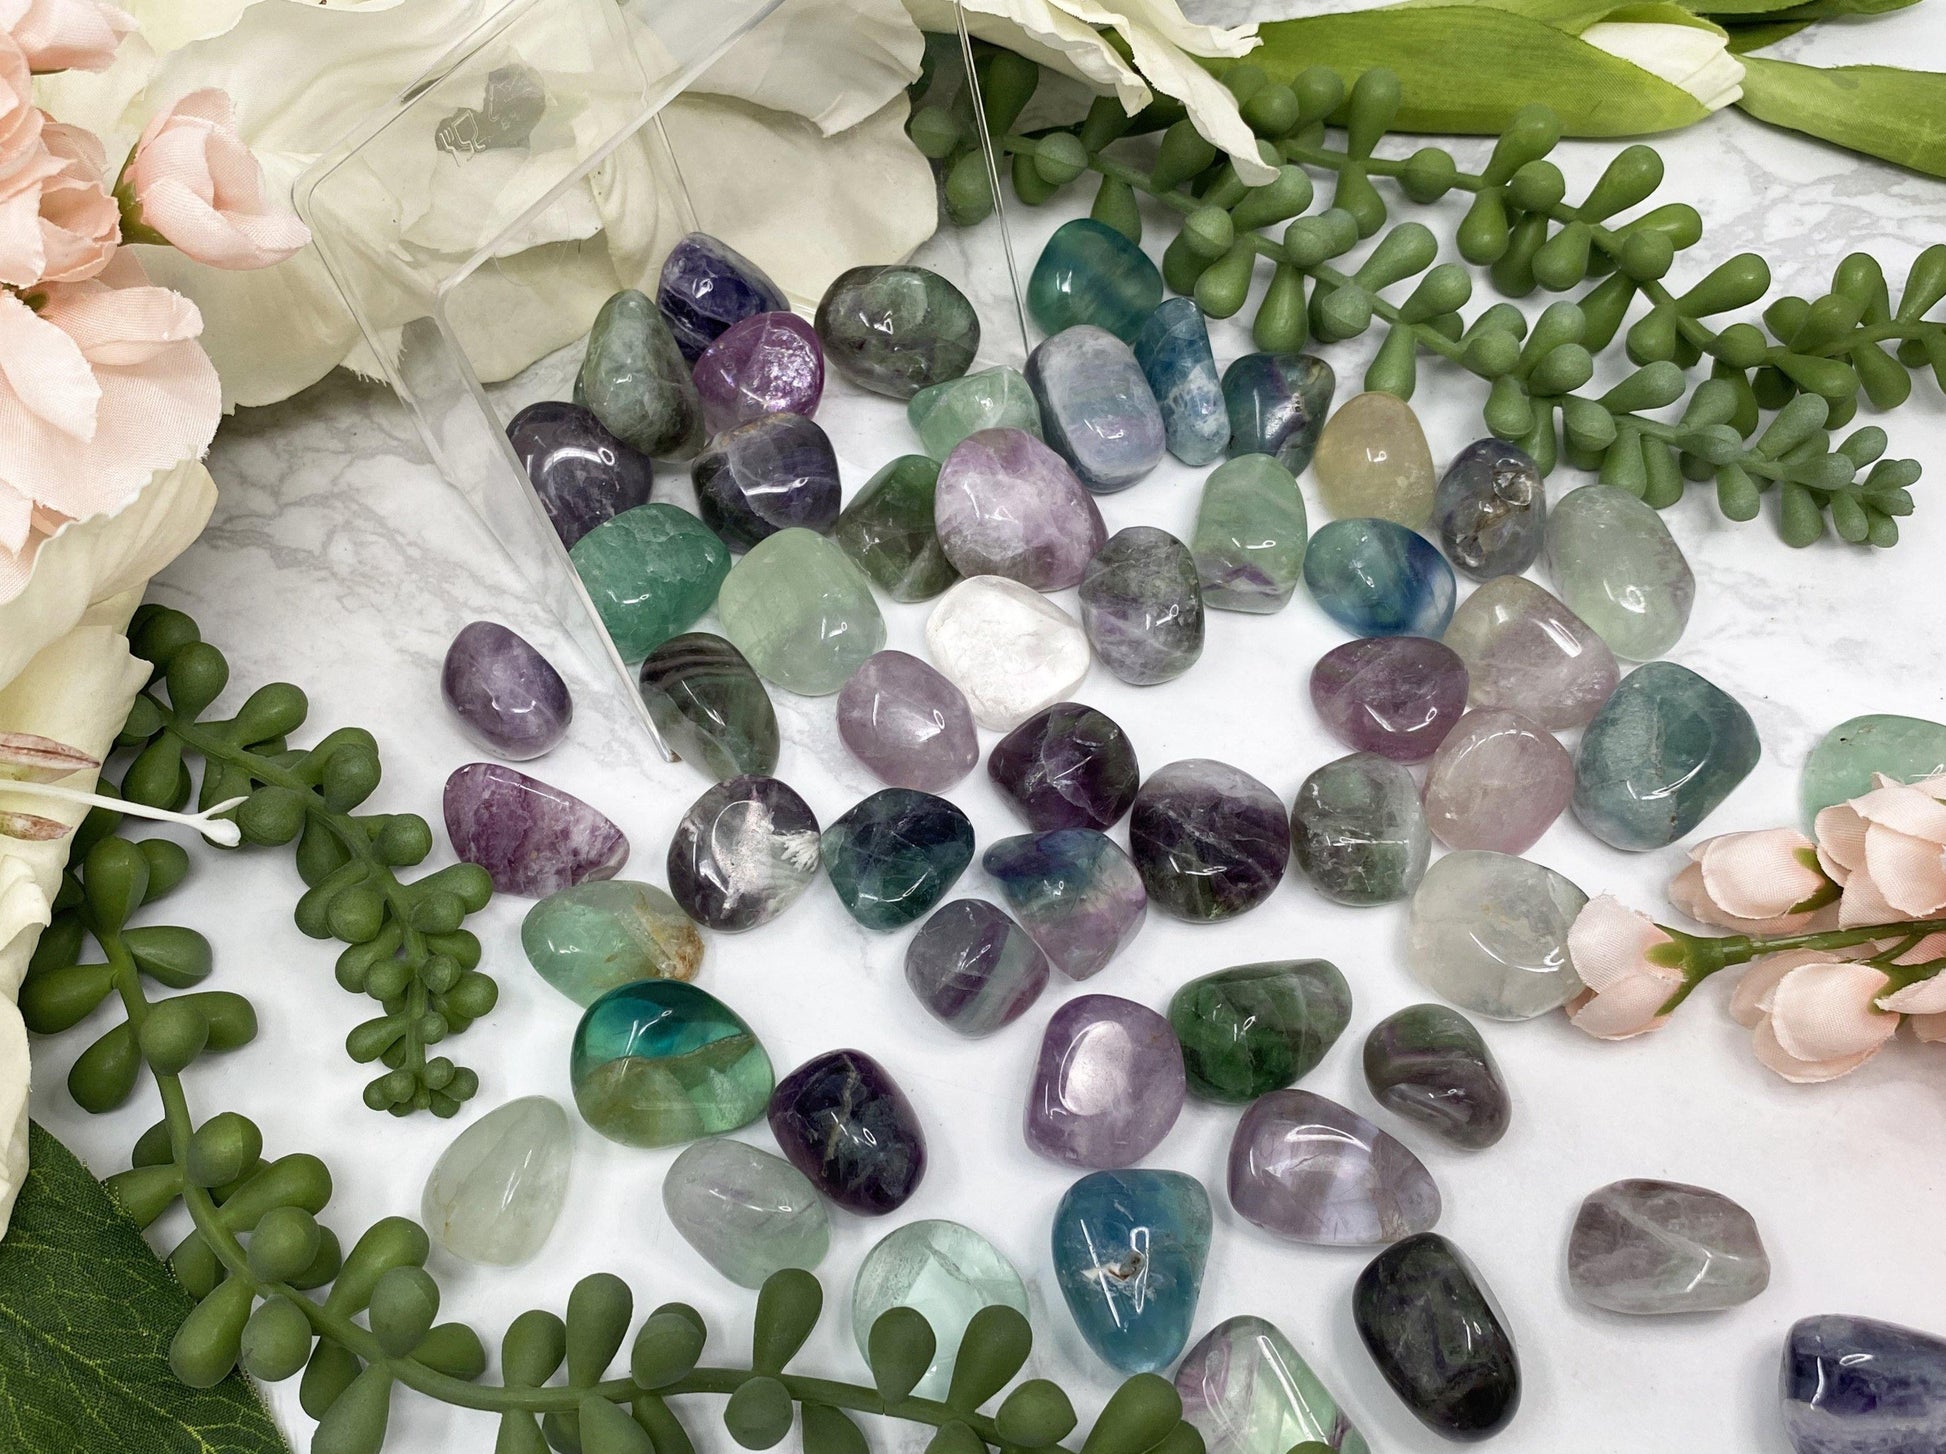 Tumbled rainbow fluorite crystals. Crystal pebbles for gridding or carrying in your purse.